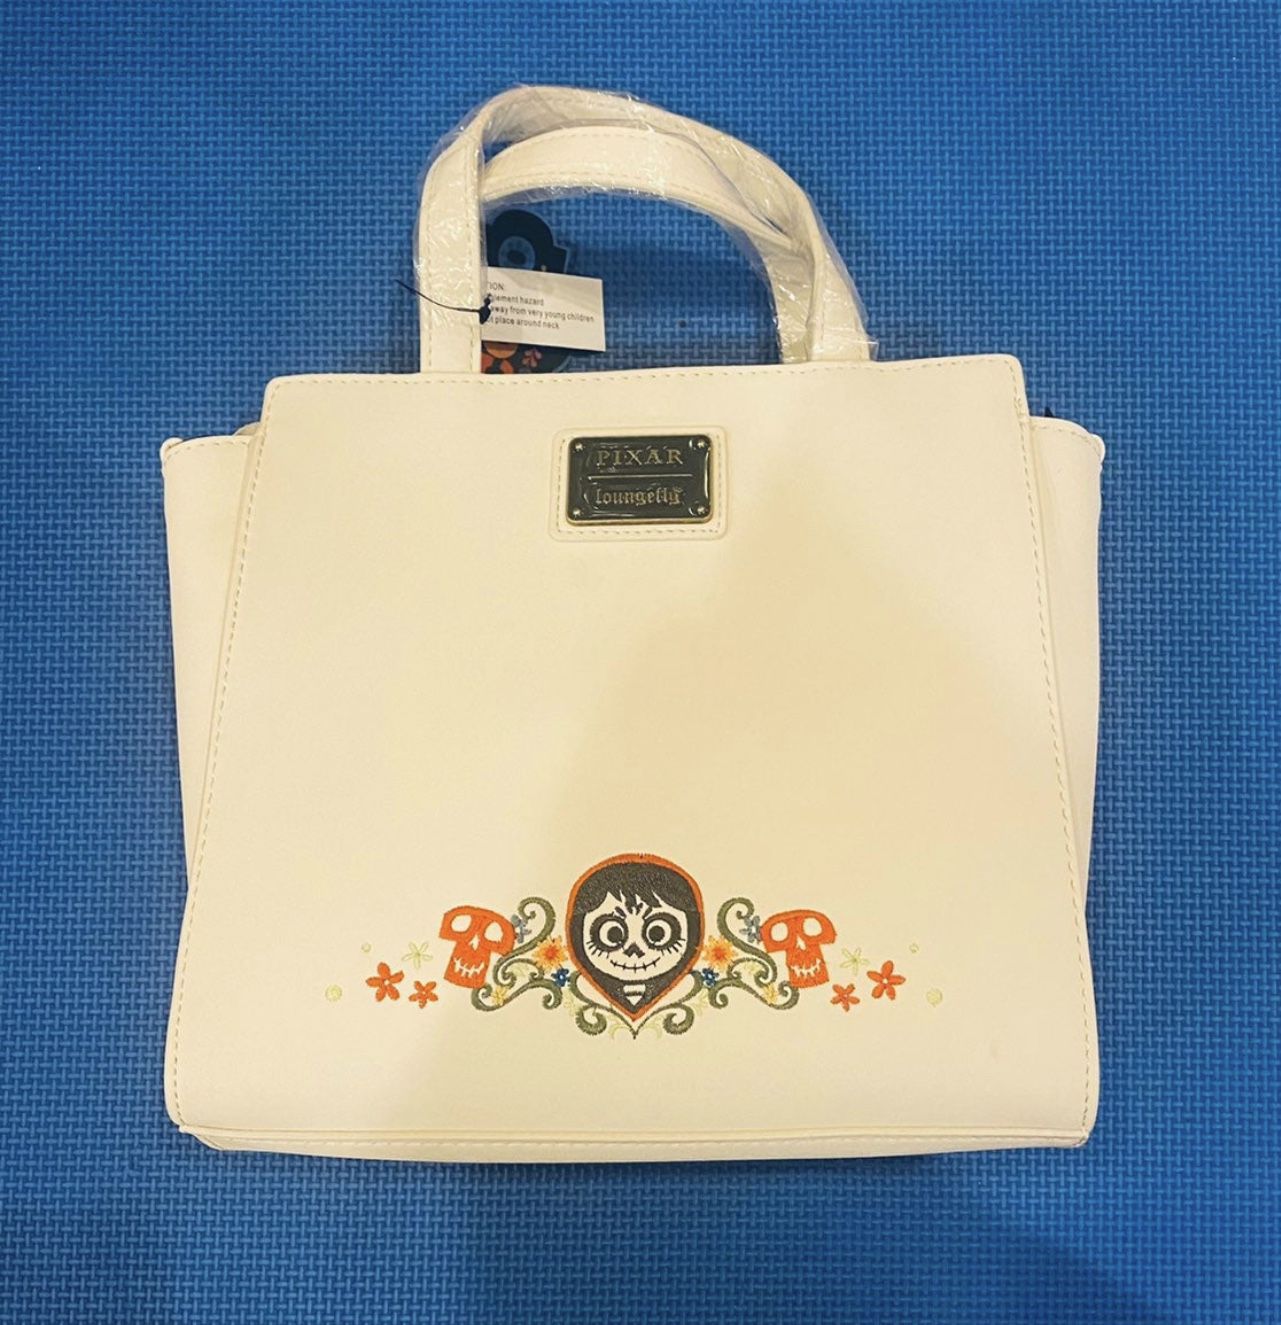 Loungefly Disney Pixar Coco Handbag/Tote/Purse/Crossbody with Matching  Wallet -NWTS for Sale in Glendale, AZ - OfferUp